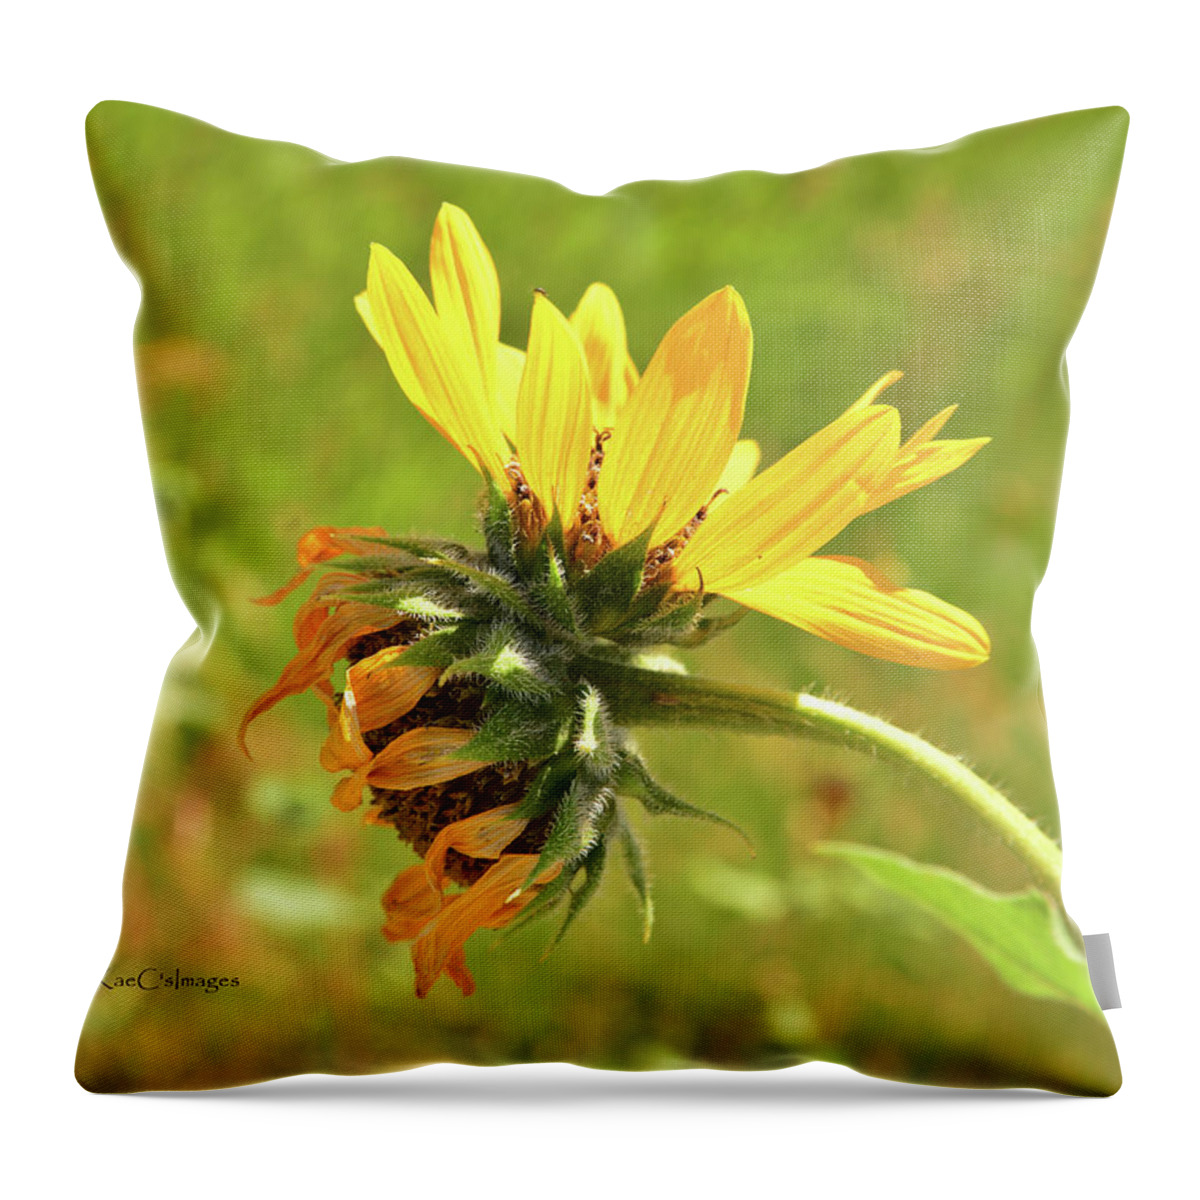 Sunflower Throw Pillow featuring the photograph Sunflower 184 Double Bloom by Kae Cheatham